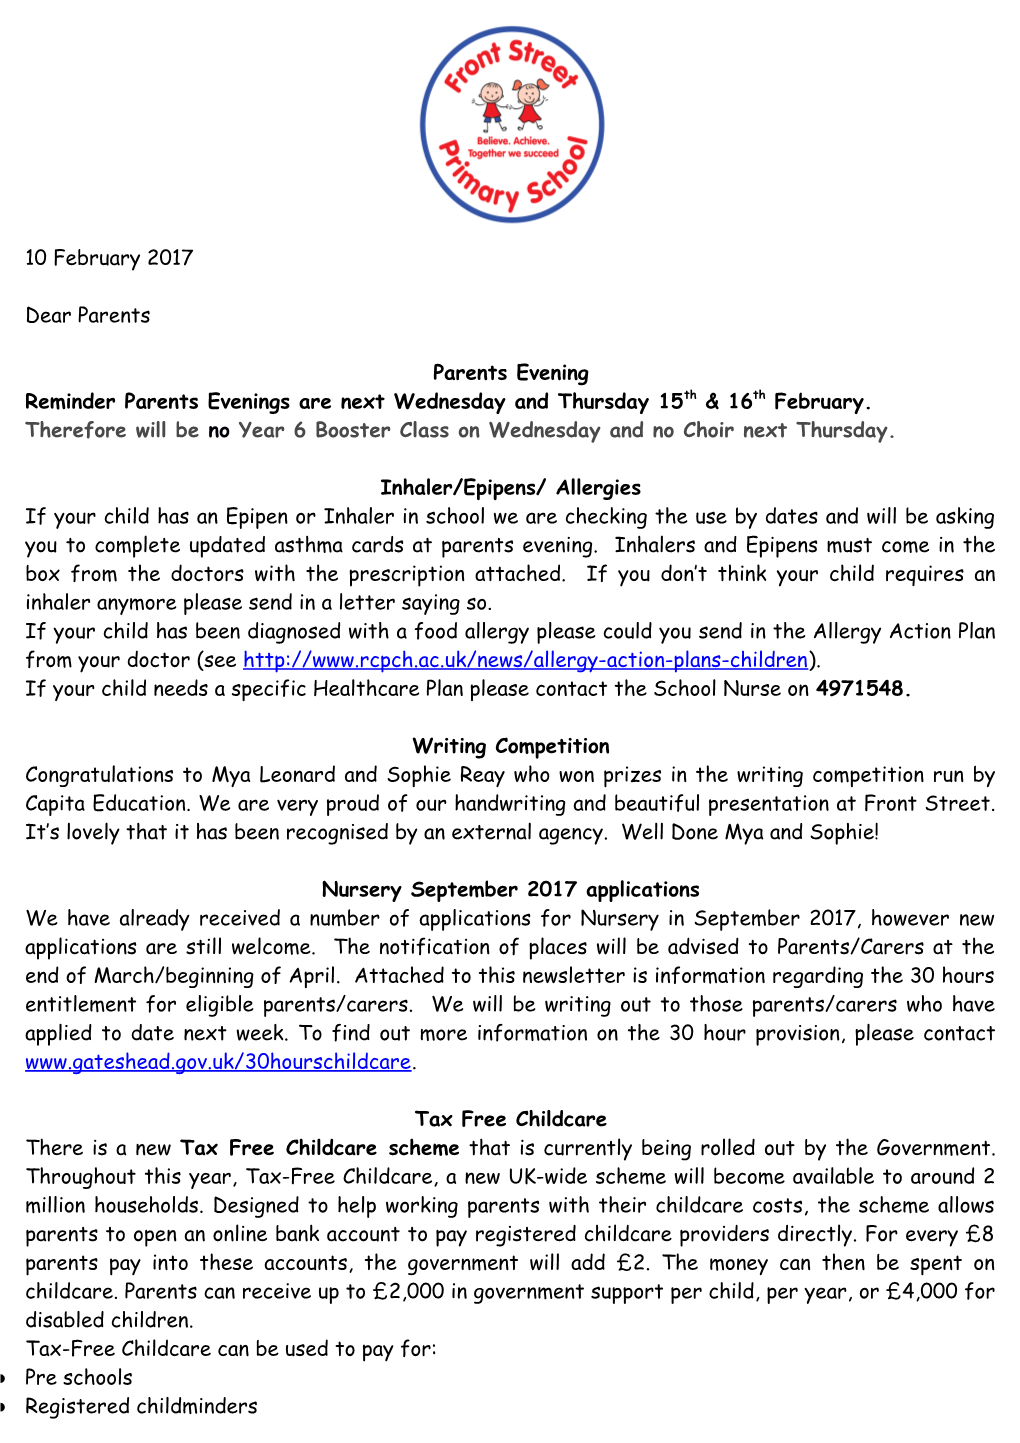 Reminder Parents Evenings Are Next Wednesday and Thursday 15Th & 16Th February